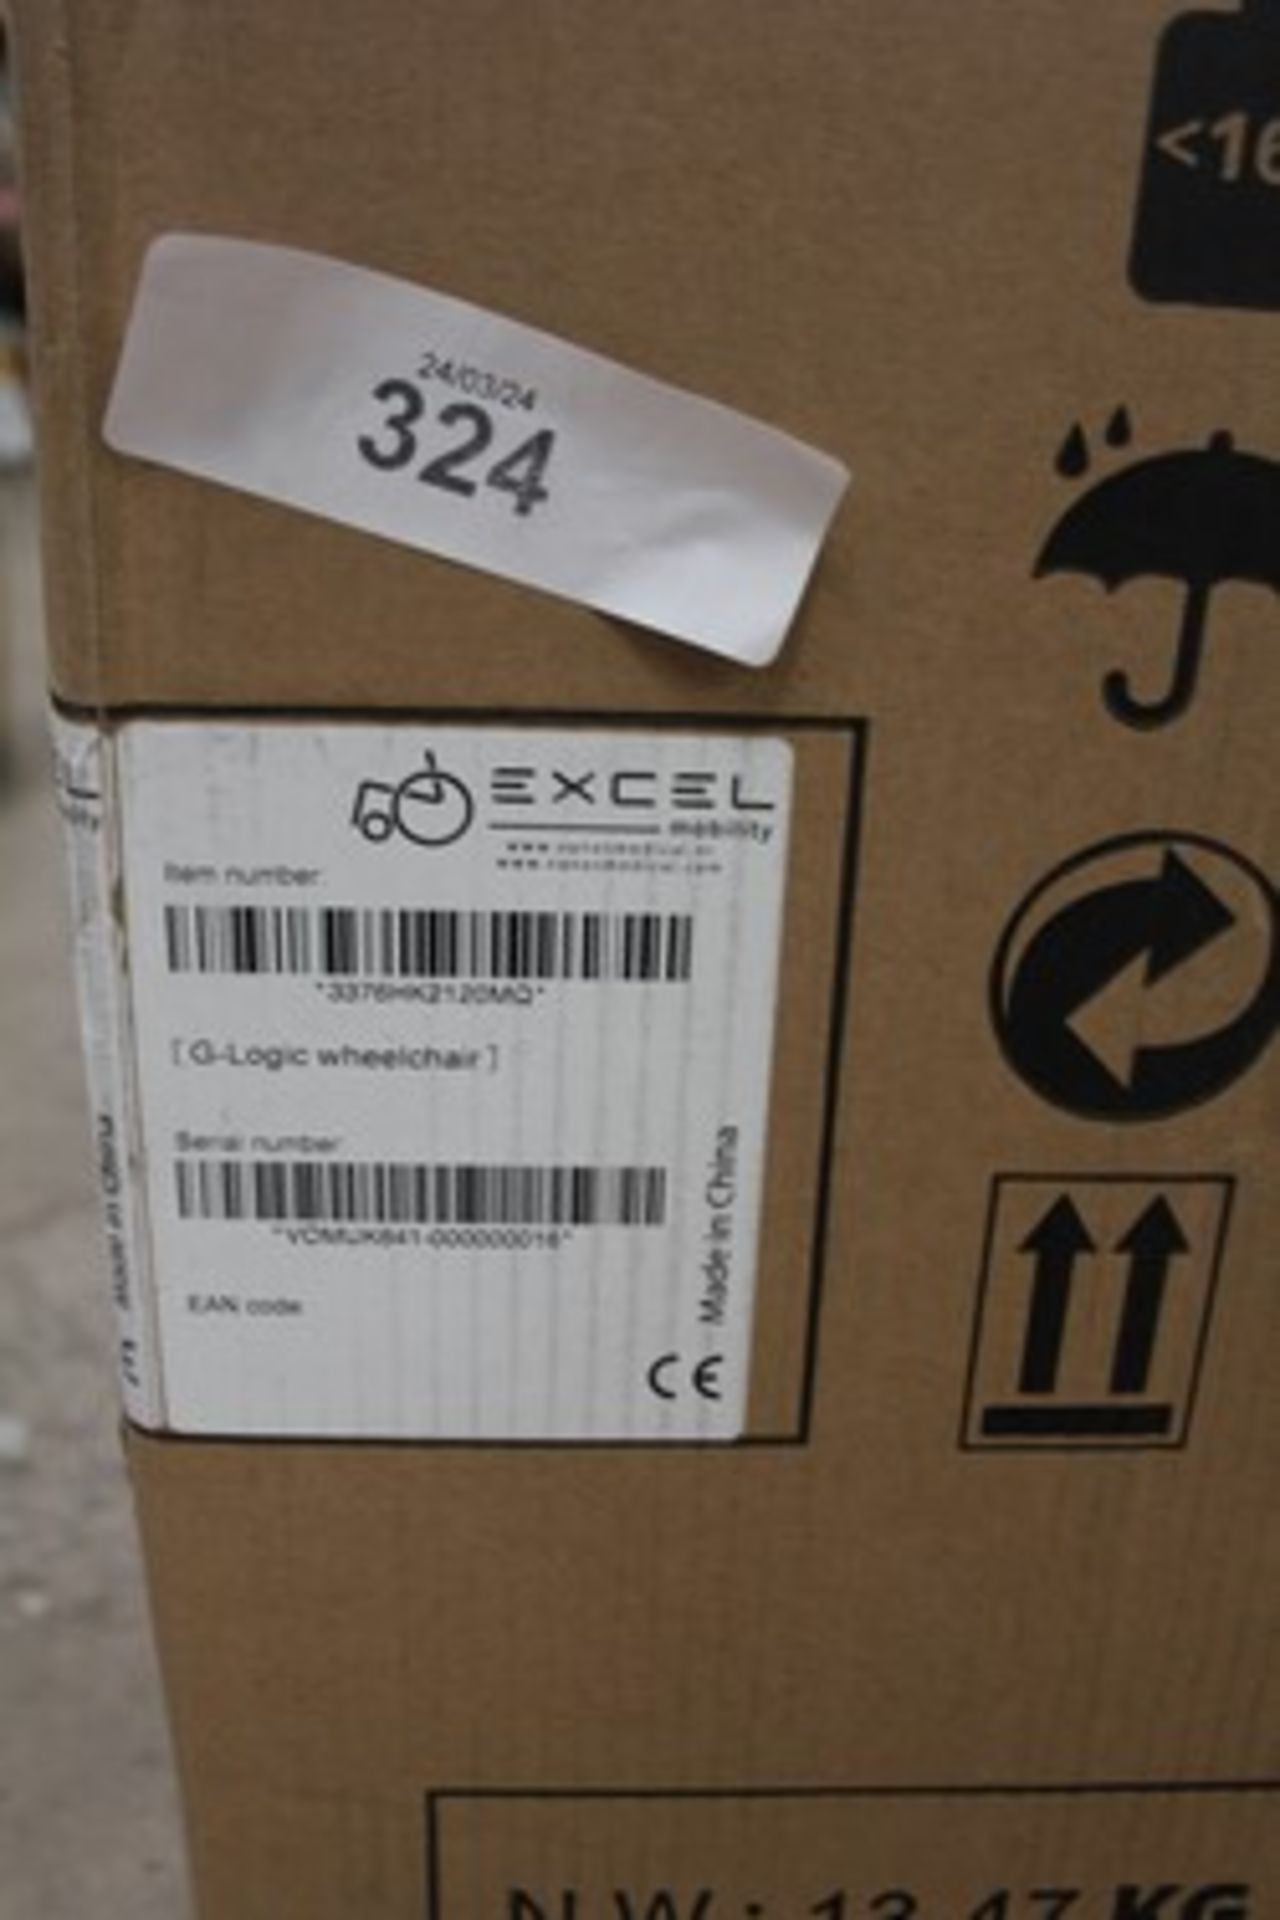 1 x Excel G-logic wheelchair, code: 3376HK2120MQ - sealed new in box (GS37) - Image 2 of 2